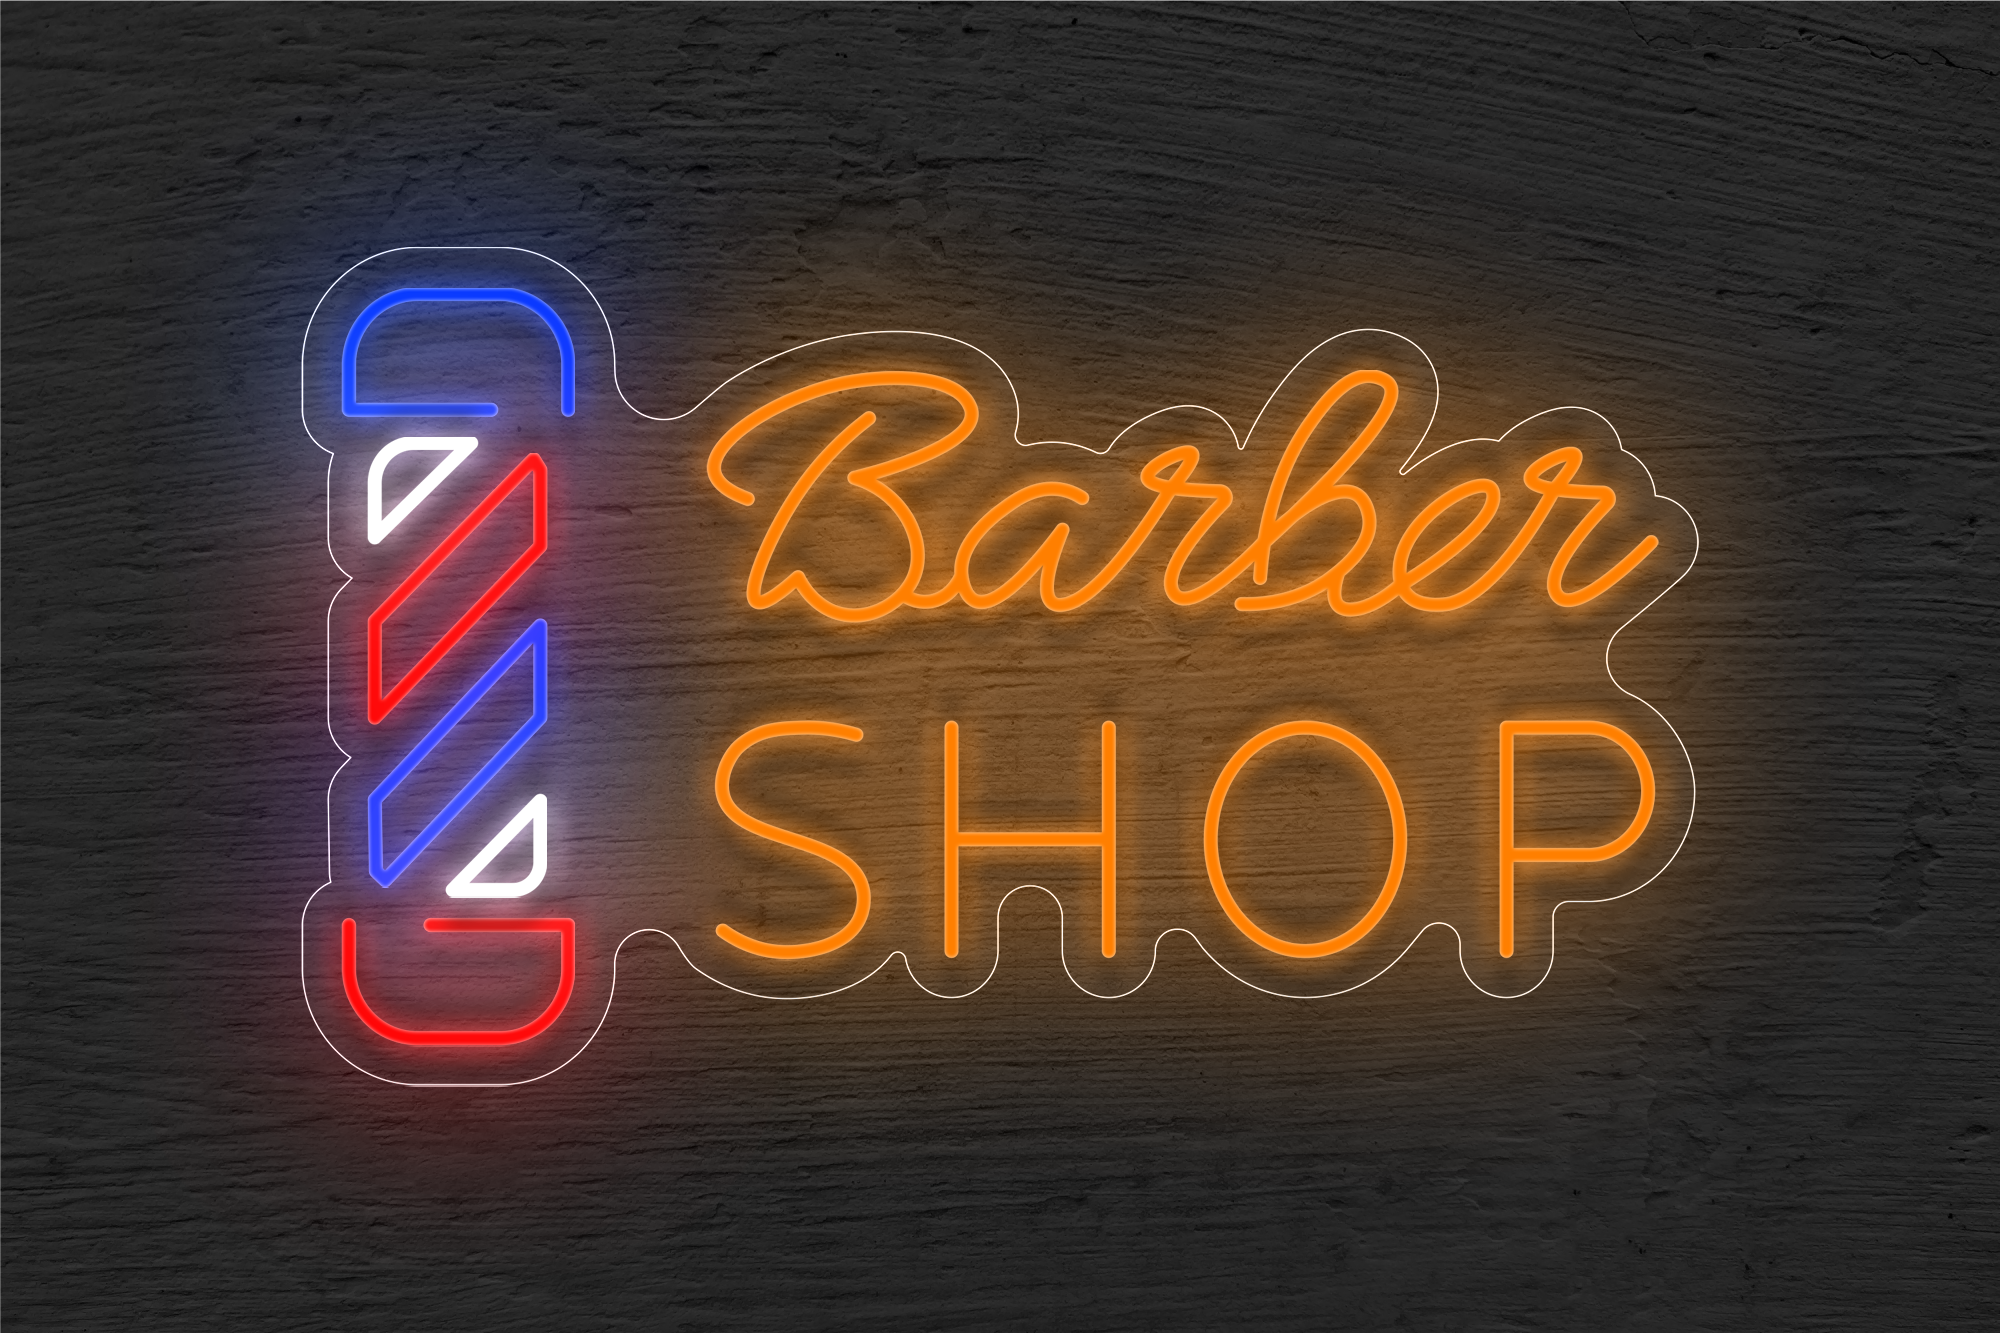 "Barber SHOP" with Logo LED Neon Sign